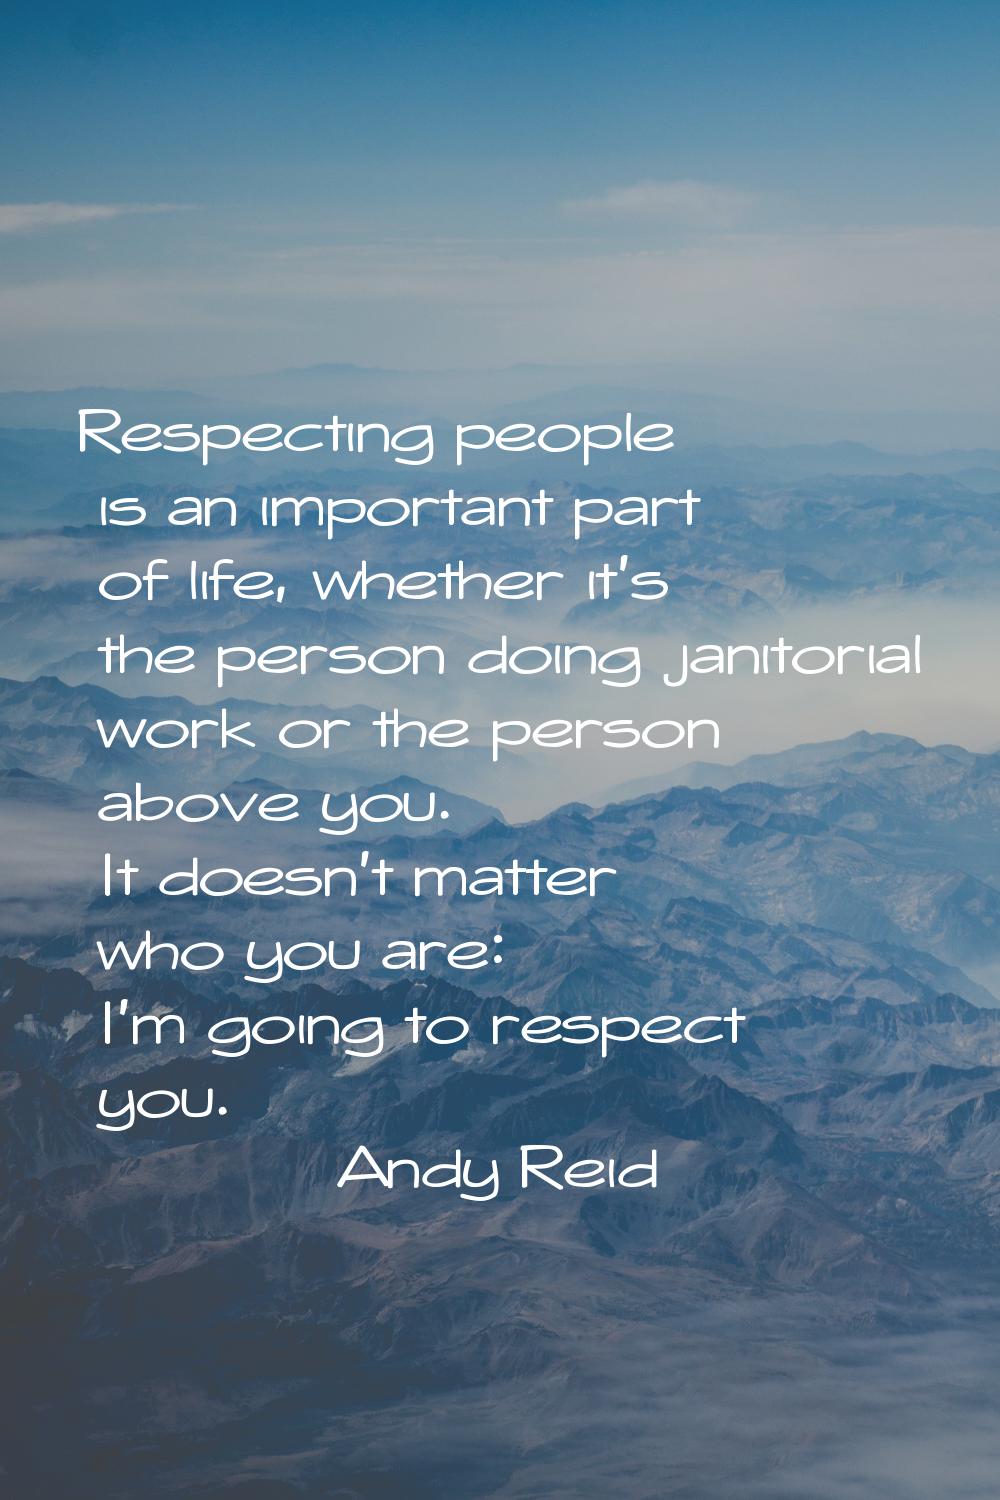 Respecting people is an important part of life, whether it's the person doing janitorial work or th